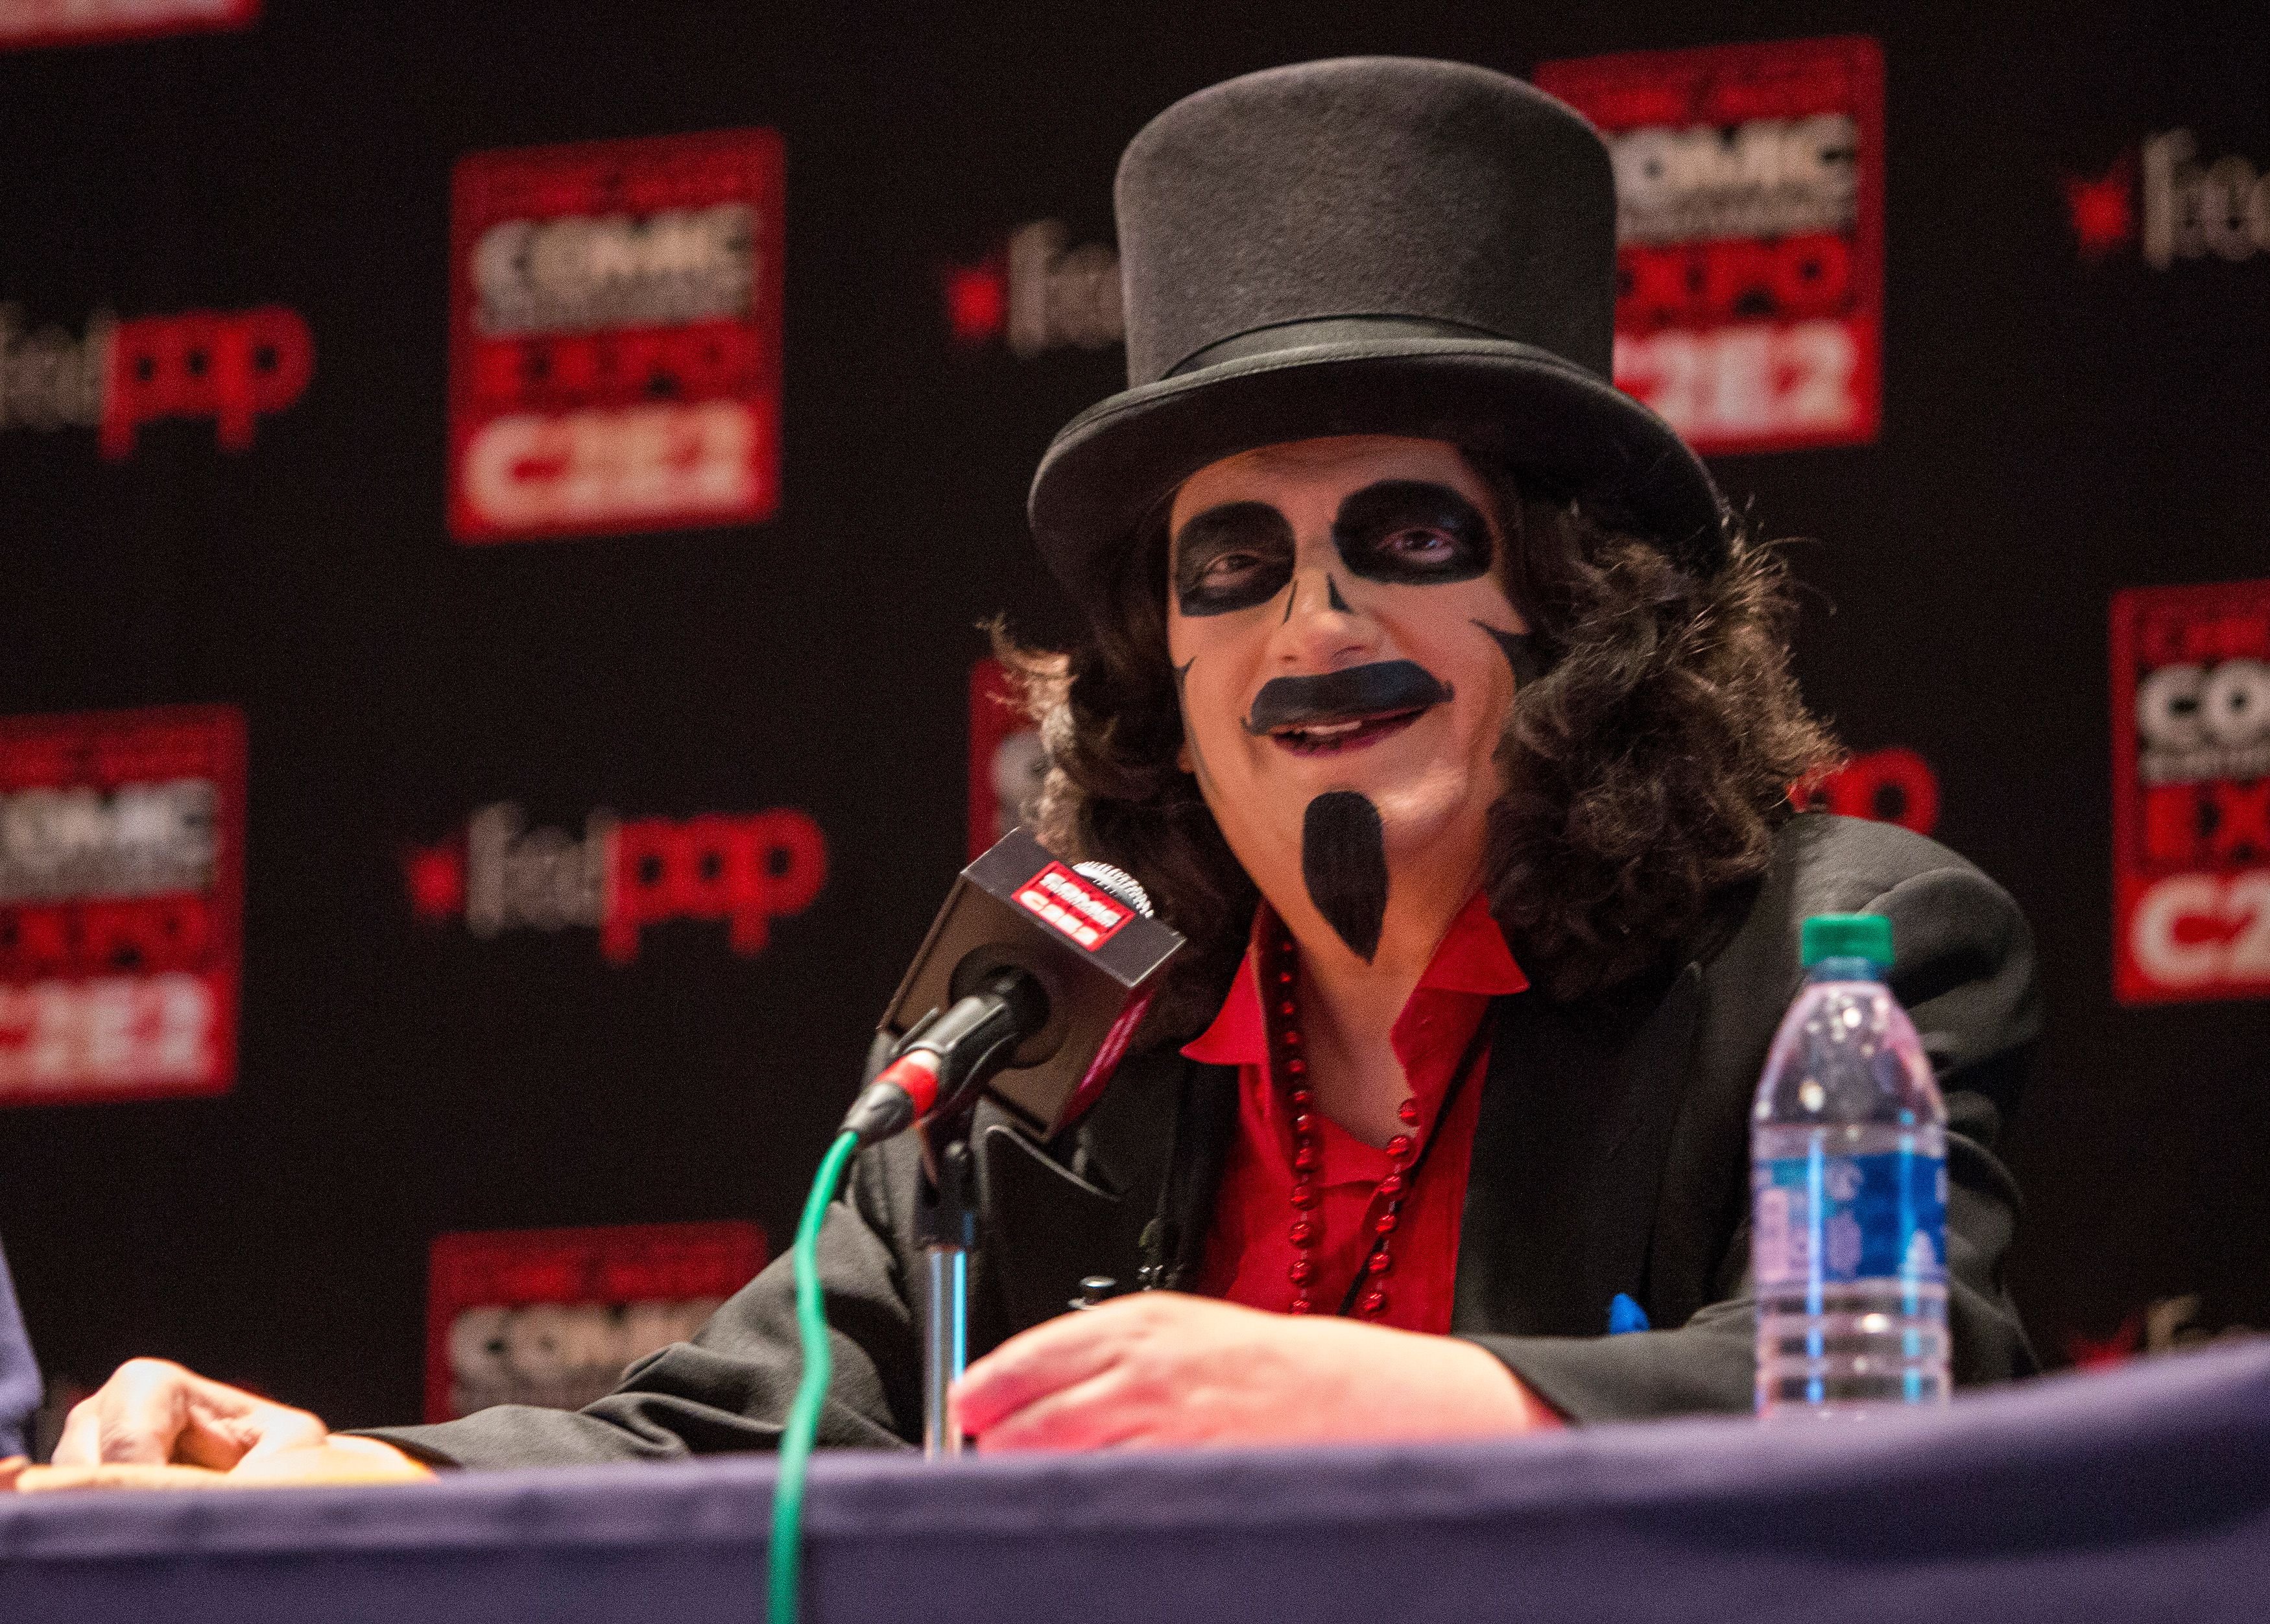 Rich Koz of "Son of Svengoolie" during the C2E2 on February 29, 2020 in Chicago, Illinois. | Source: Getty Images